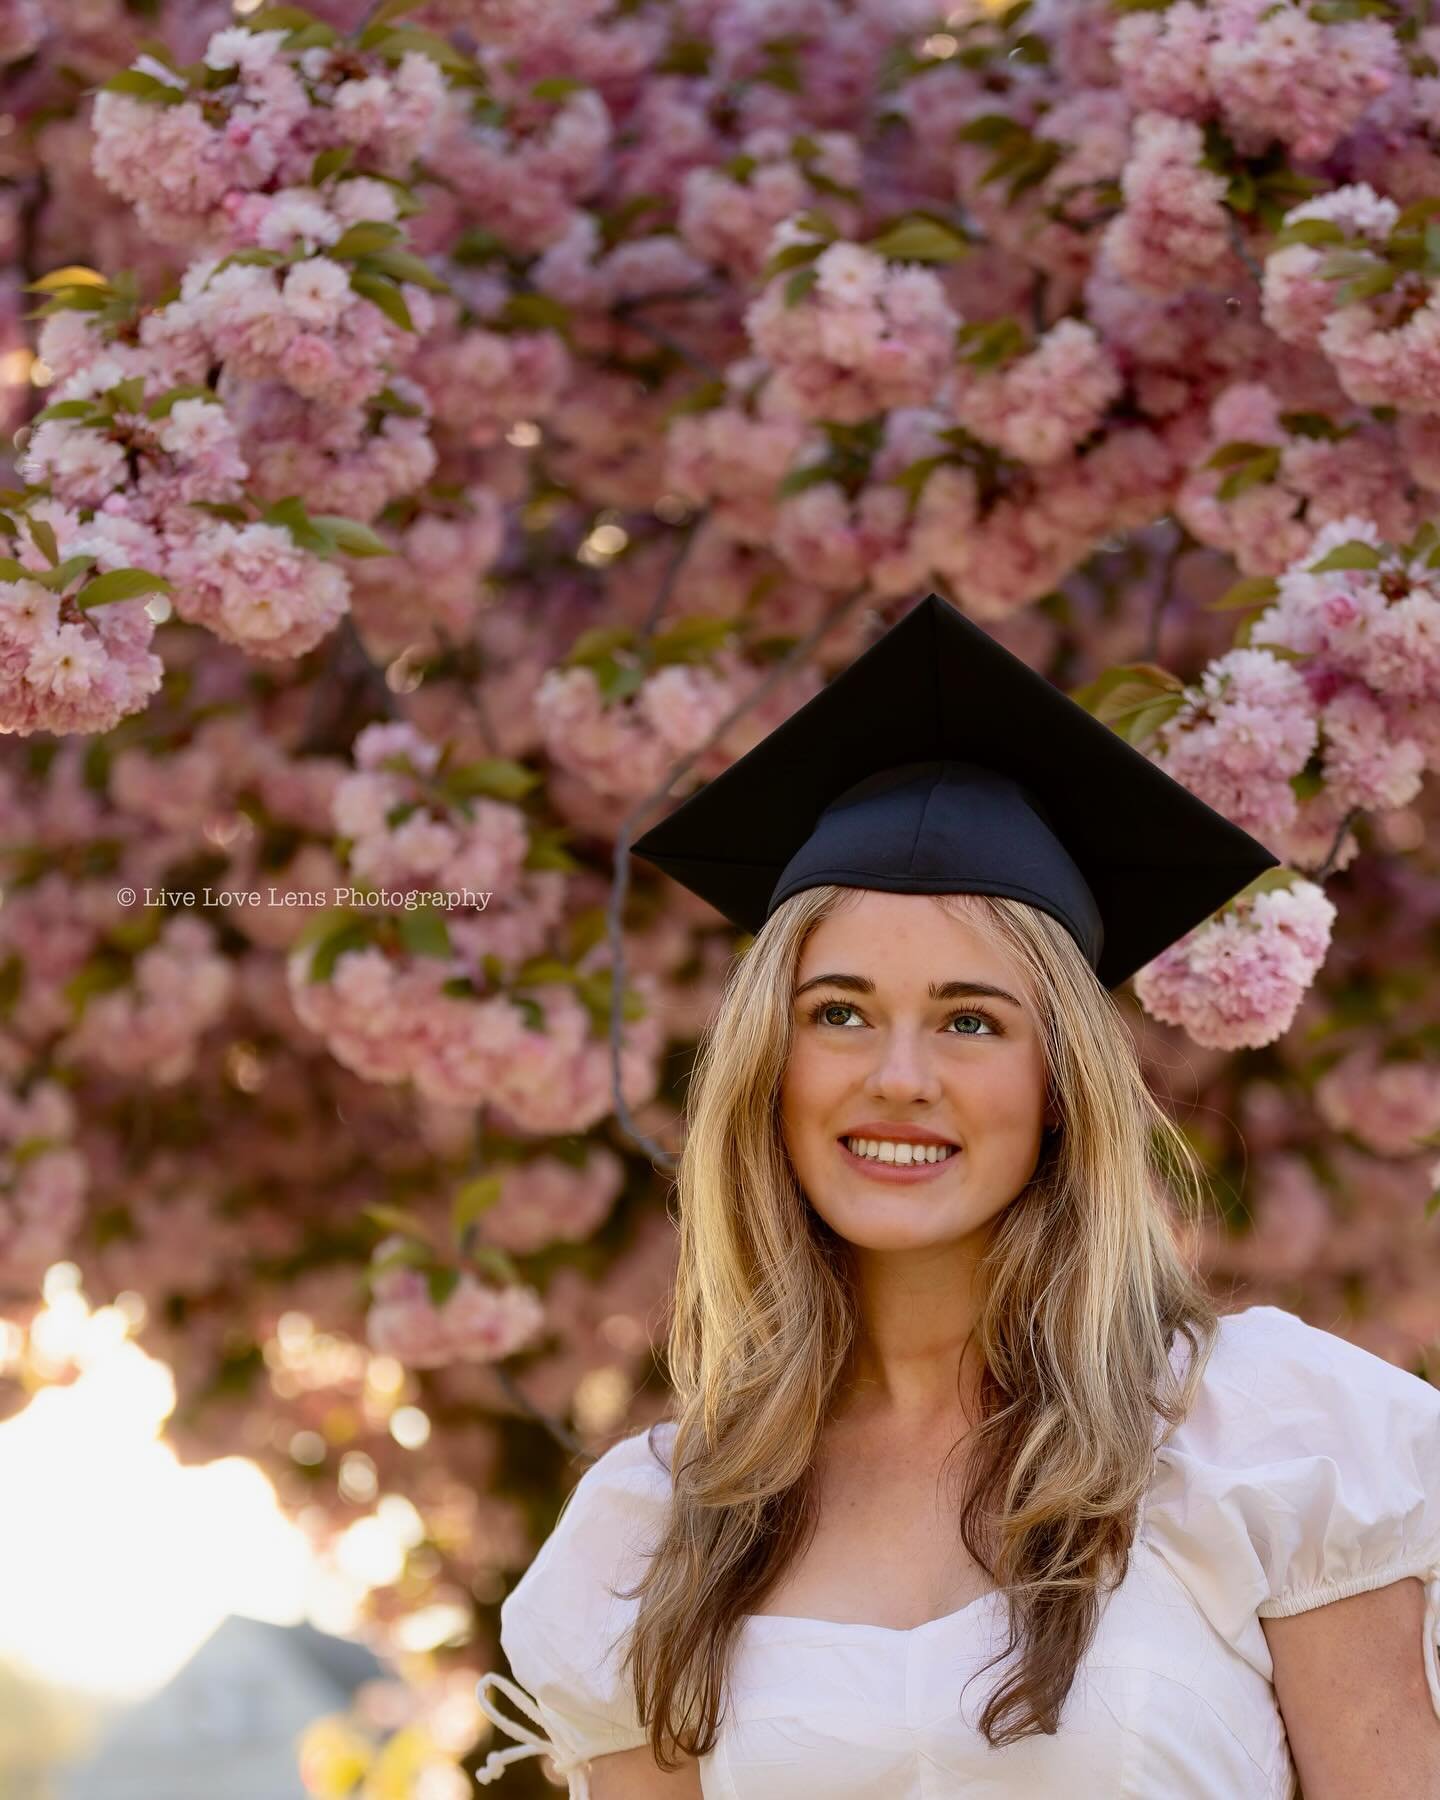 There are not enough slides in the world to post this beautiful graduate&rsquo;s photo session! 👩🏼&zwj;🎓 What an absolutely stunning young woman inside and out, one who graced the stage just recently as a lead in her high school musical. 🪩 She is